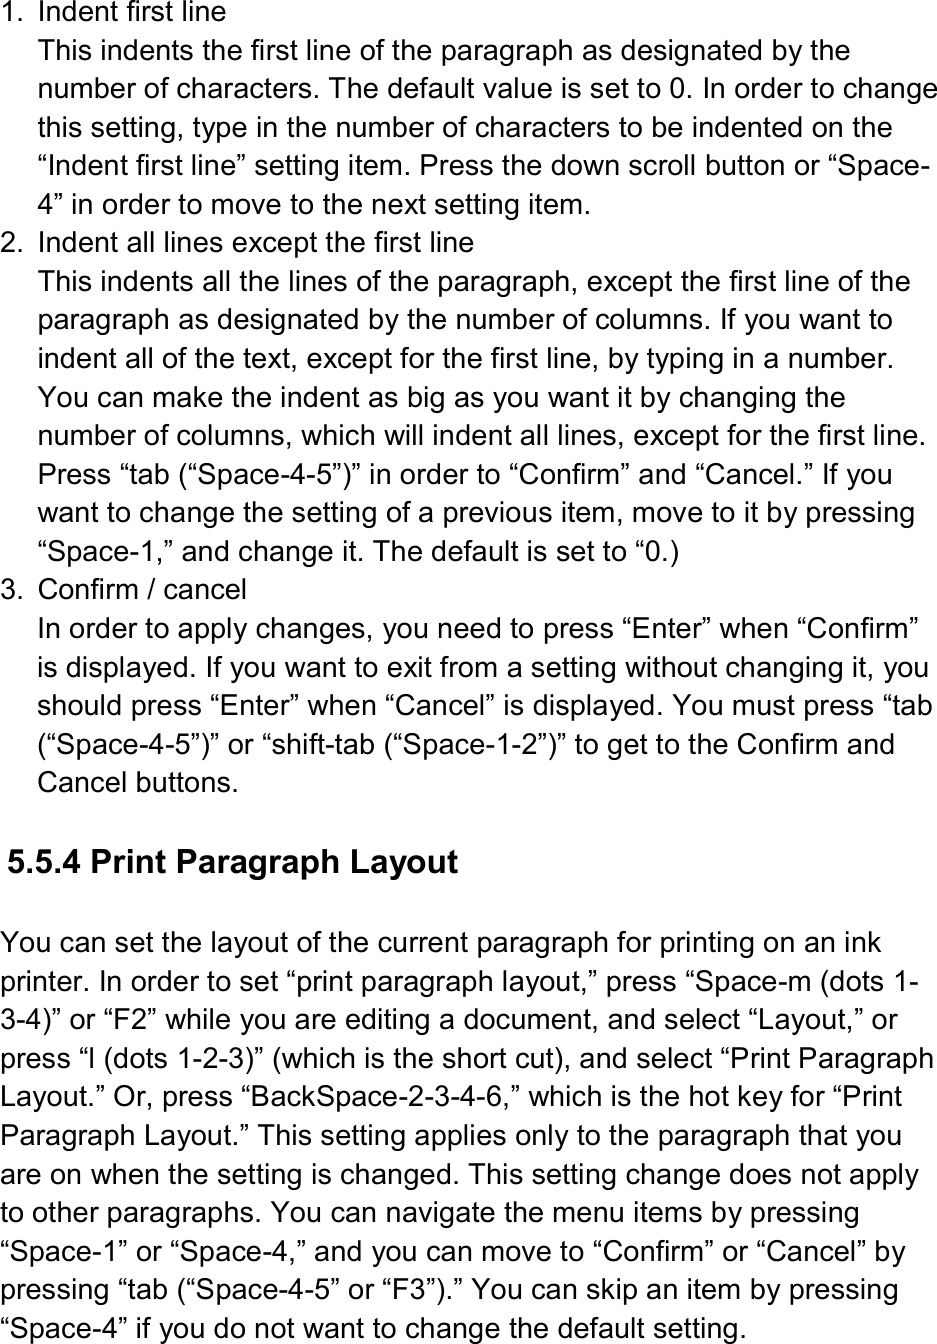  1.  Indent first line This indents the first line of the paragraph as designated by the number of characters. The default value is set to 0. In order to change this setting, type in the number of characters to be indented on the “Indent first line” setting item. Press the down scroll button or “Space-4” in order to move to the next setting item. 2.  Indent all lines except the first line This indents all the lines of the paragraph, except the first line of the paragraph as designated by the number of columns. If you want to indent all of the text, except for the first line, by typing in a number. You can make the indent as big as you want it by changing the number of columns, which will indent all lines, except for the first line. Press “tab (“Space-4-5”)” in order to “Confirm” and “Cancel.” If you want to change the setting of a previous item, move to it by pressing “Space-1,” and change it. The default is set to “0.) 3.  Confirm / cancel In order to apply changes, you need to press “Enter” when “Confirm” is displayed. If you want to exit from a setting without changing it, you should press “Enter” when “Cancel” is displayed. You must press “tab (“Space-4-5”)” or “shift-tab (“Space-1-2”)” to get to the Confirm and Cancel buttons.  5.5.4 Print Paragraph Layout    You can set the layout of the current paragraph for printing on an ink printer. In order to set “print paragraph layout,” press “Space-m (dots 1-3-4)” or “F2” while you are editing a document, and select “Layout,” or press “l (dots 1-2-3)” (which is the short cut), and select “Print Paragraph Layout.” Or, press “BackSpace-2-3-4-6,” which is the hot key for “Print Paragraph Layout.” This setting applies only to the paragraph that you are on when the setting is changed. This setting change does not apply to other paragraphs. You can navigate the menu items by pressing “Space-1” or “Space-4,” and you can move to “Confirm” or “Cancel” by pressing “tab (“Space-4-5” or “F3”).” You can skip an item by pressing “Space-4” if you do not want to change the default setting.  